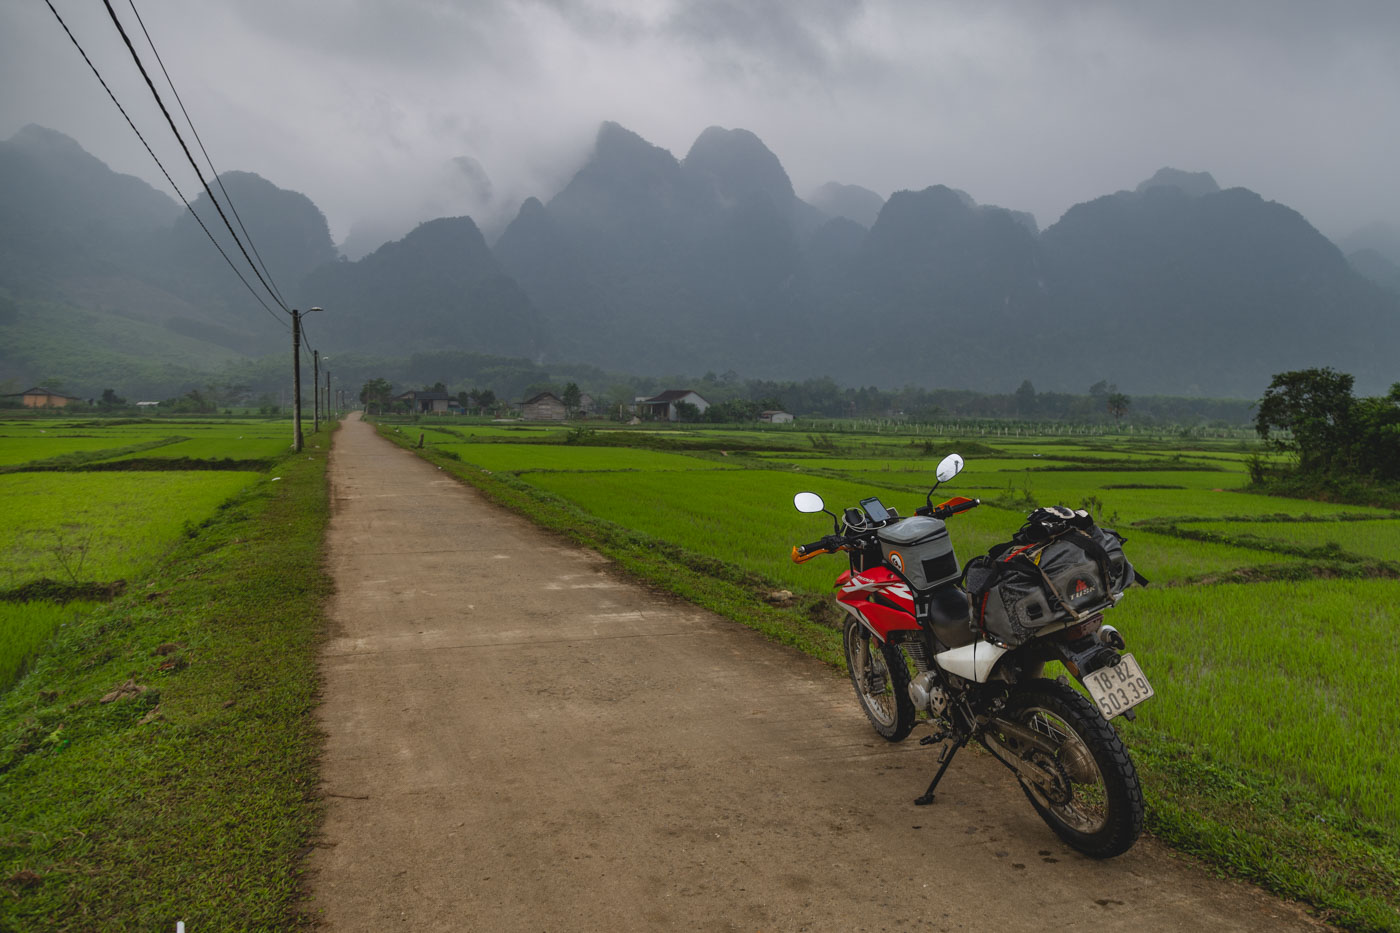 My motorcycle parked on a road in the middle of a rice field with inclement weather coming over the mountains in Vietnam.